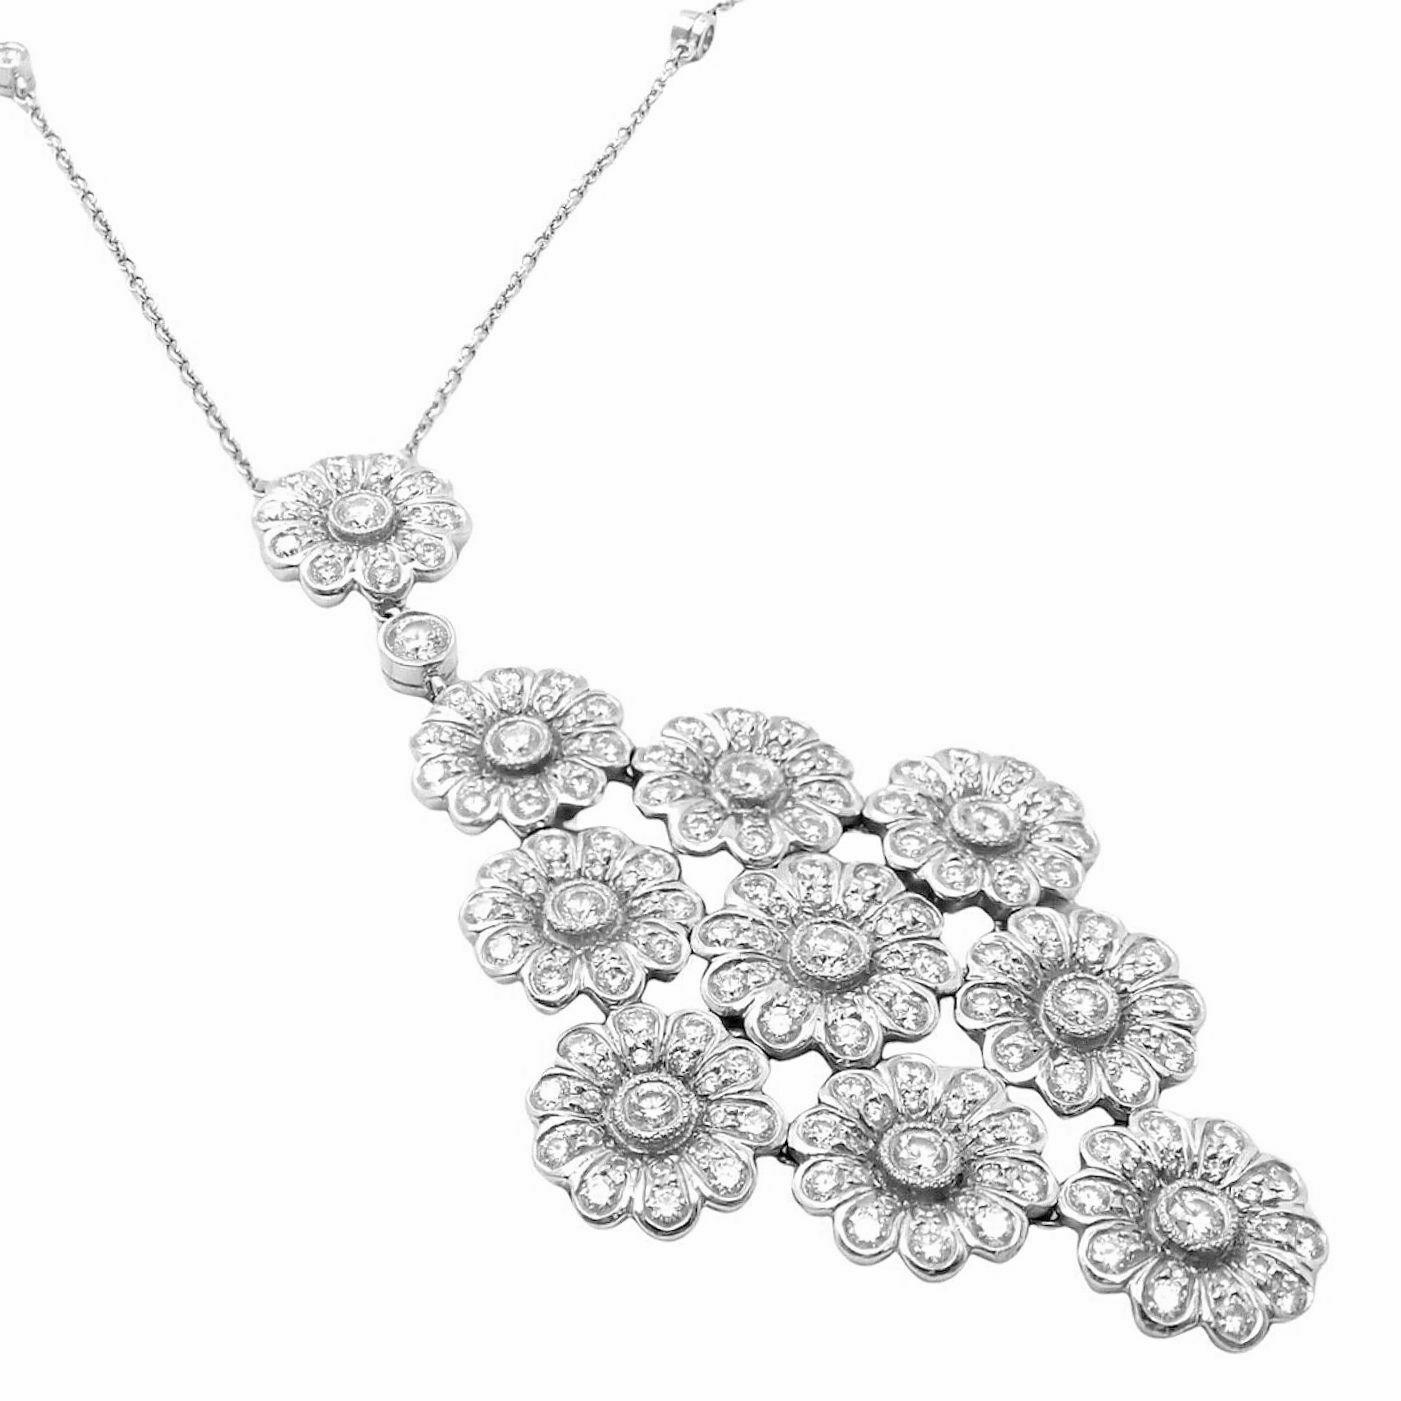 Platinum Diamond Large Daisy Flower Pendant Necklace by Tiffany & Co. 
With 117 Round brilliant cut diamonds VS1 clarity, G color total weight approx. 1.25ctw
Details: 
Weight: 18 grams
Length: 16.75